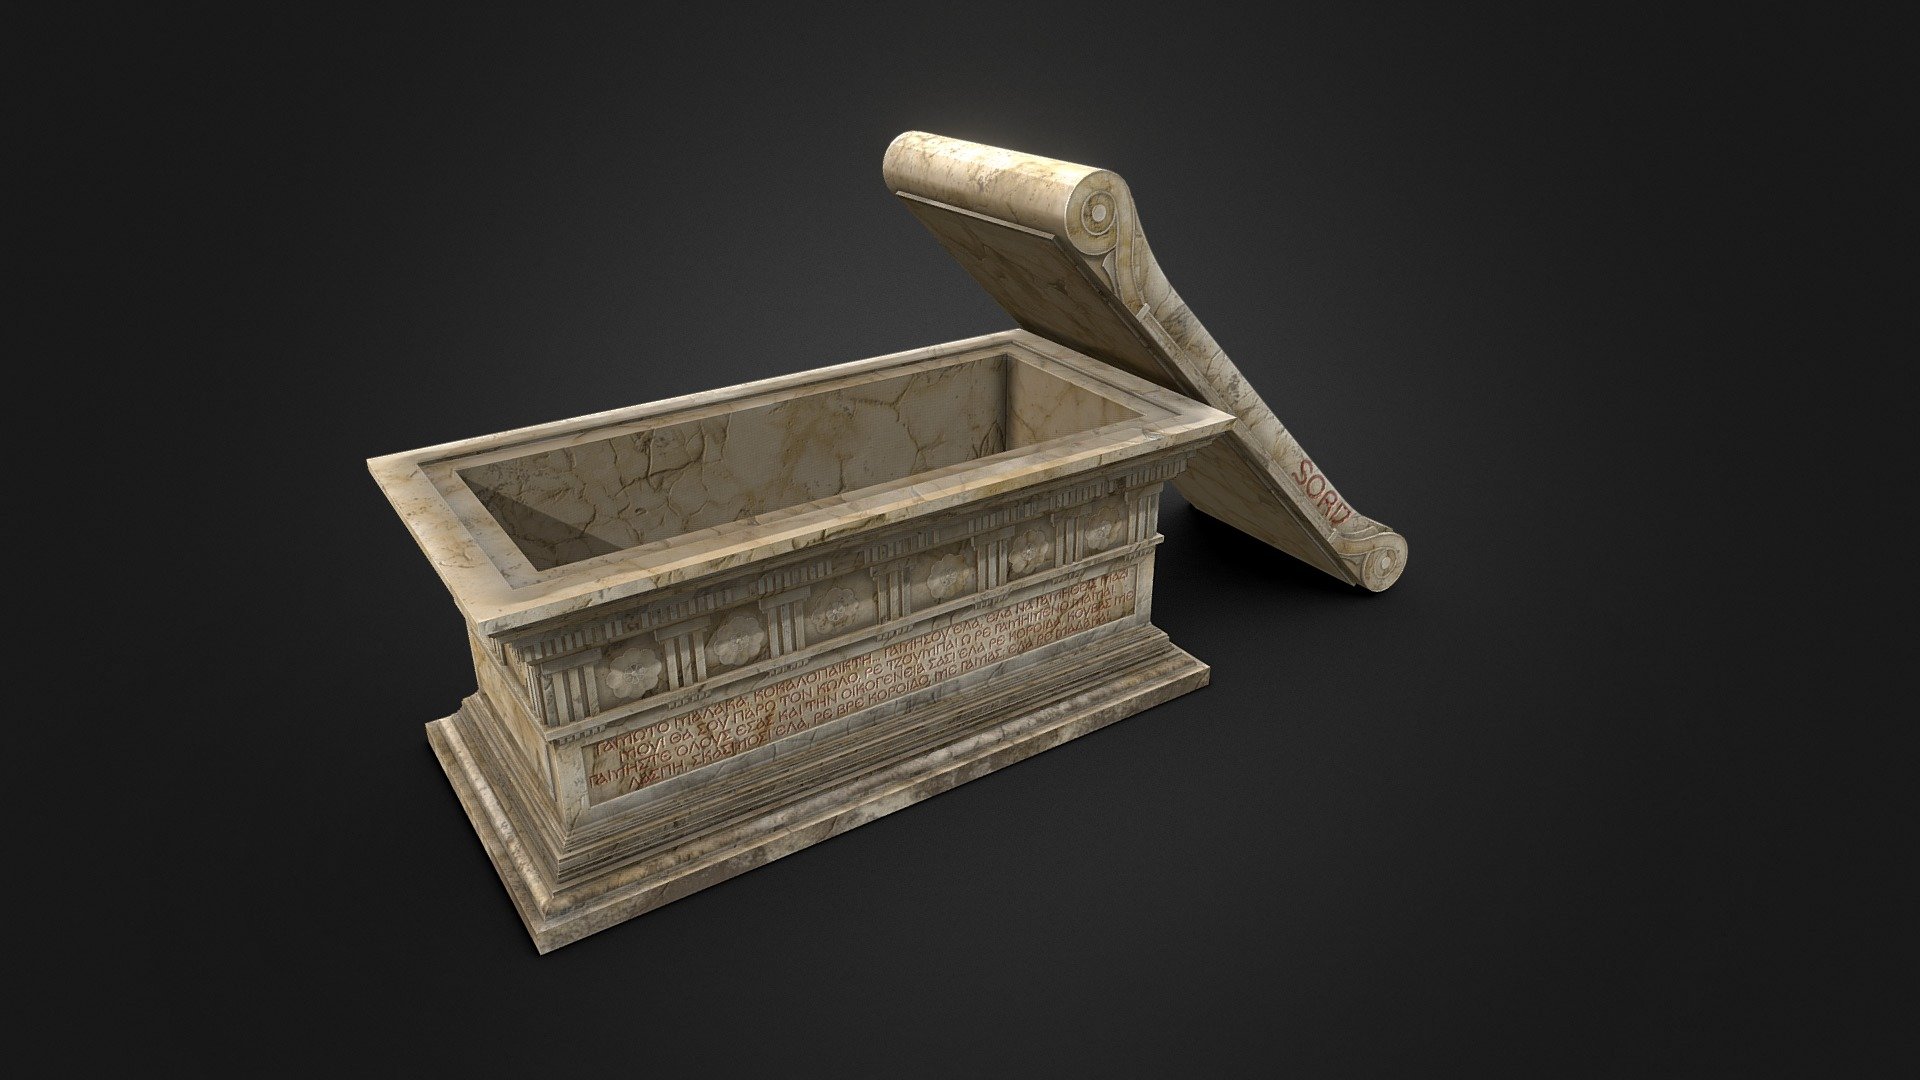 I wanted to make a new hellenic thing, but then realised that this may be original Roman design - at least I found no evidence of greek origins of the design. It's still doric though!

This model is based on the sarcophagus of Lucius Cornelius Scipio Barbatus (clearly a roman guy), and here is the fun fact - the inscription on the tablet was once redone, most likely by one of the relatives of Scipio. 

So I changed the text a bit with some lines from the movie &ldquo;Blood &amp; Concrete: A Love Story